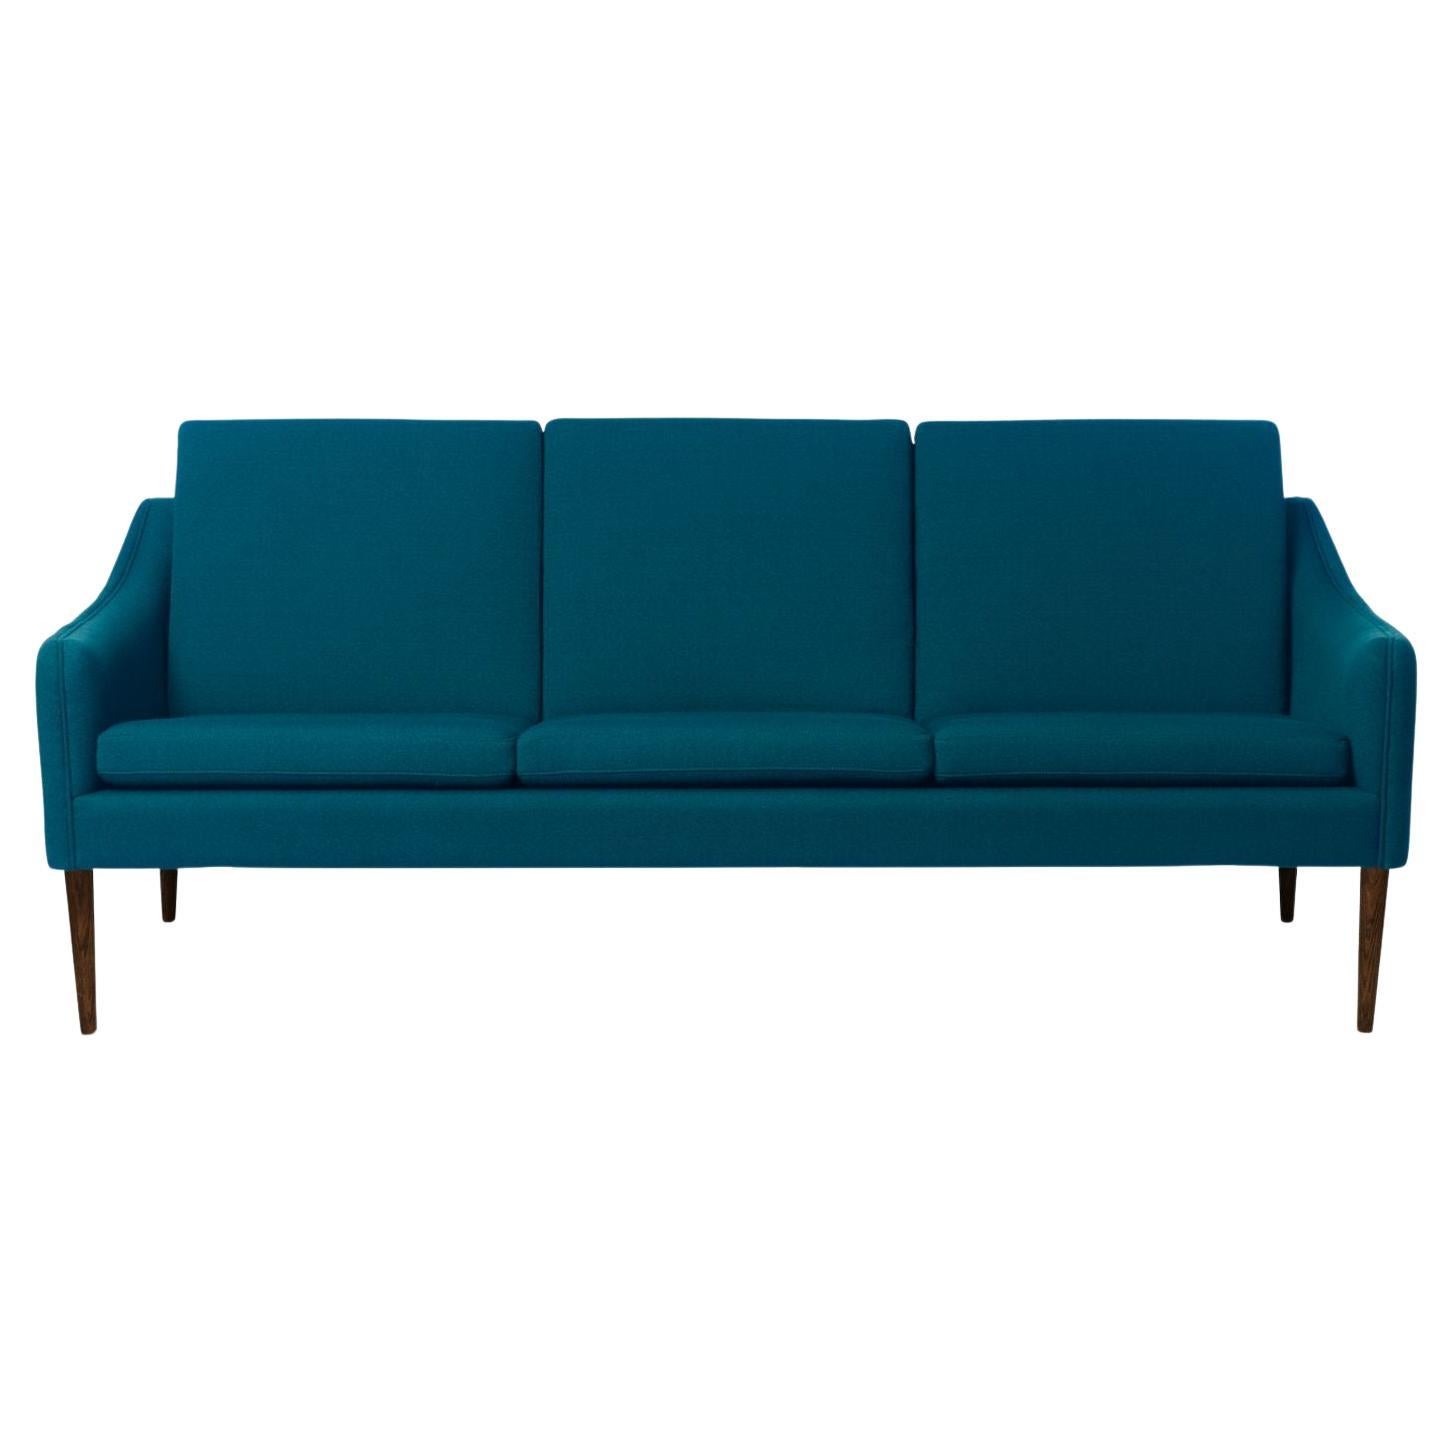 Mr Olsen 3 Seater Walnut Dark Turqouise by Warm Nordic For Sale